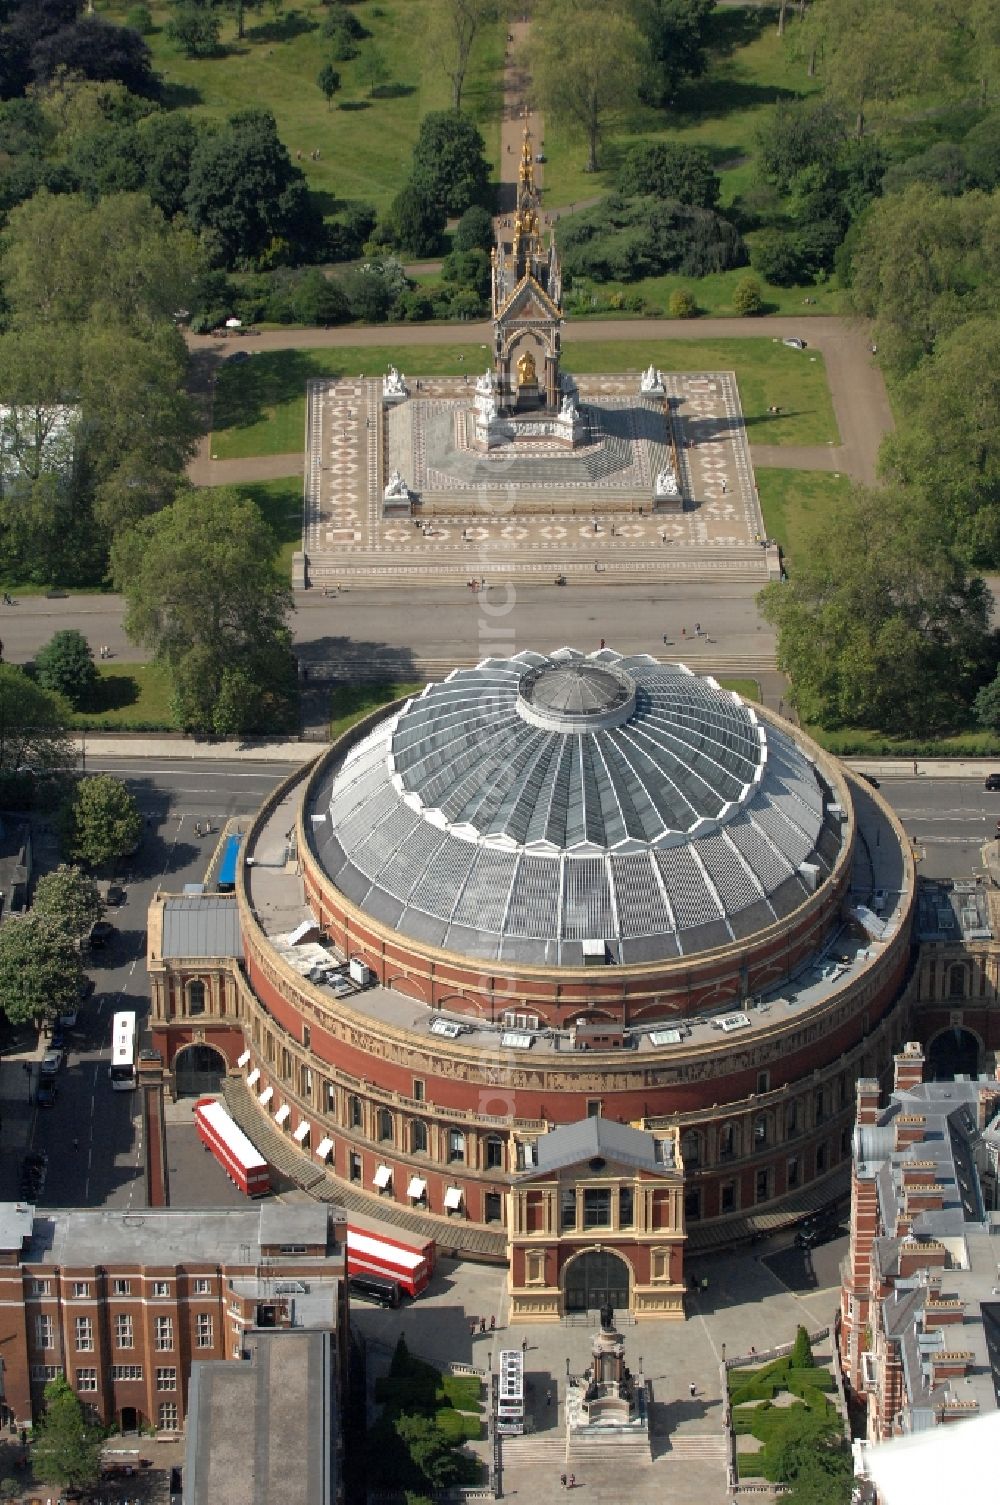 Aerial photograph London - The Concert Hall / Banquet Hall Royal Albert Hall of Arts and Sciences in London. The 29 Opened in March 1871 building is located in Kensington in central London and is the usable part of the national memorial in honor of Prince Albert of Saxe-Coburg and Gotha, the husband of Queen Victoria. In the Albert Hall hosts various types of large events